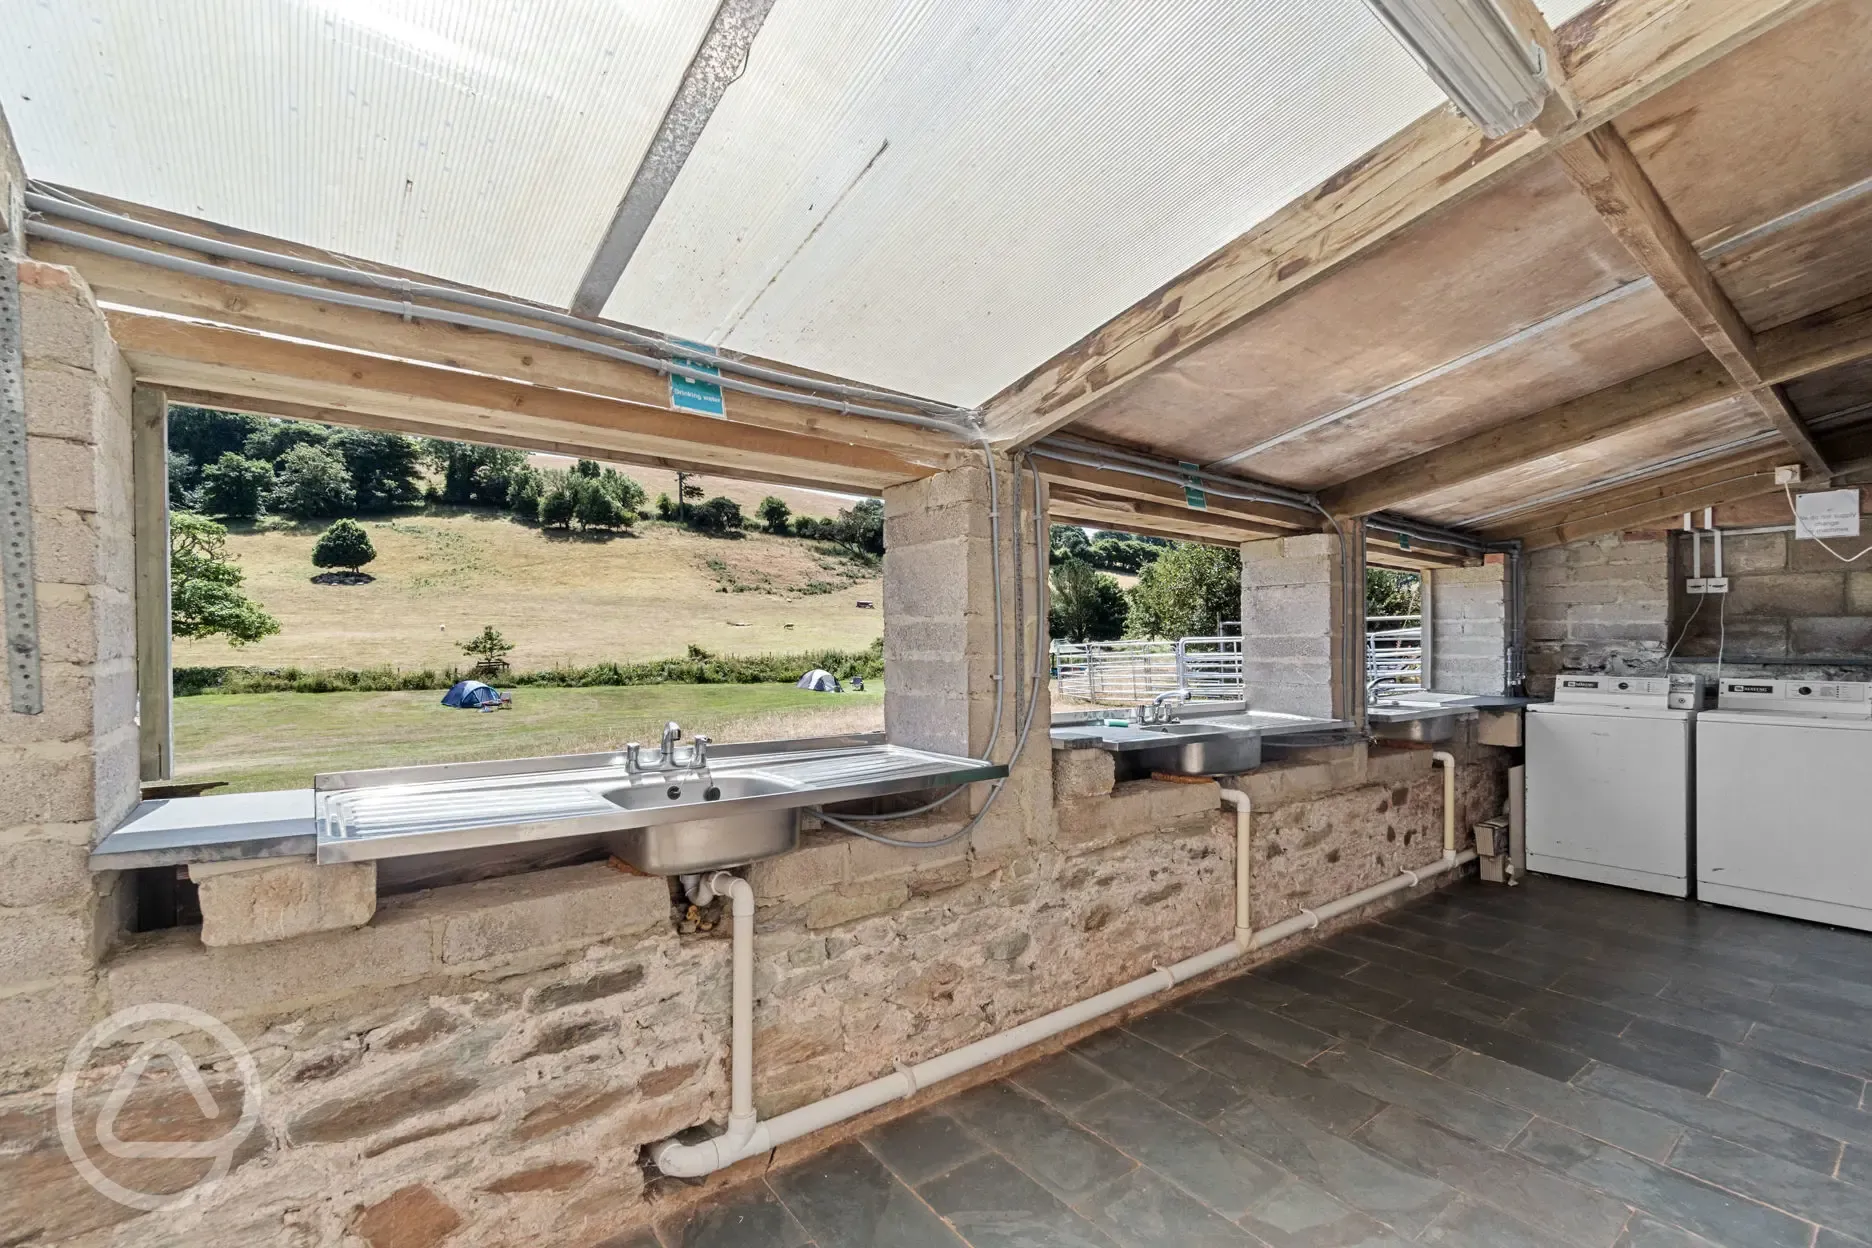 Washing up area with views of the camping field